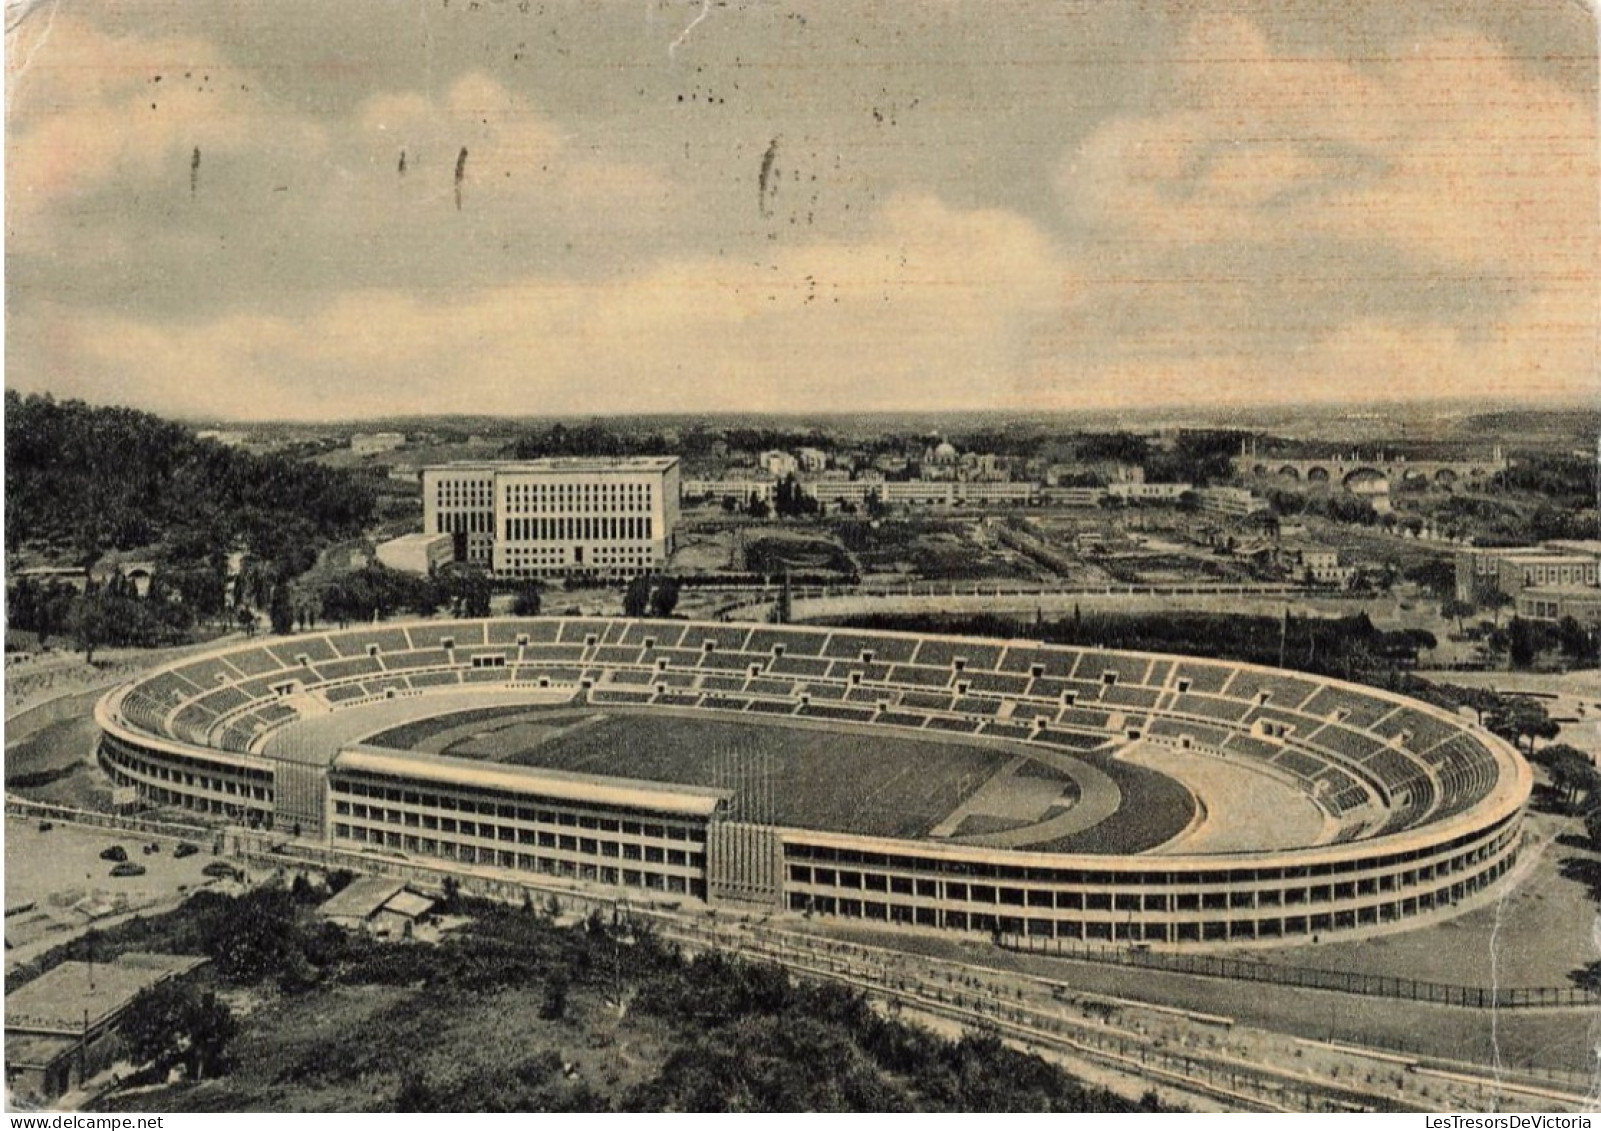 ITALIE - Rome - Stade Olympique - Carte Postale - Stades & Structures Sportives